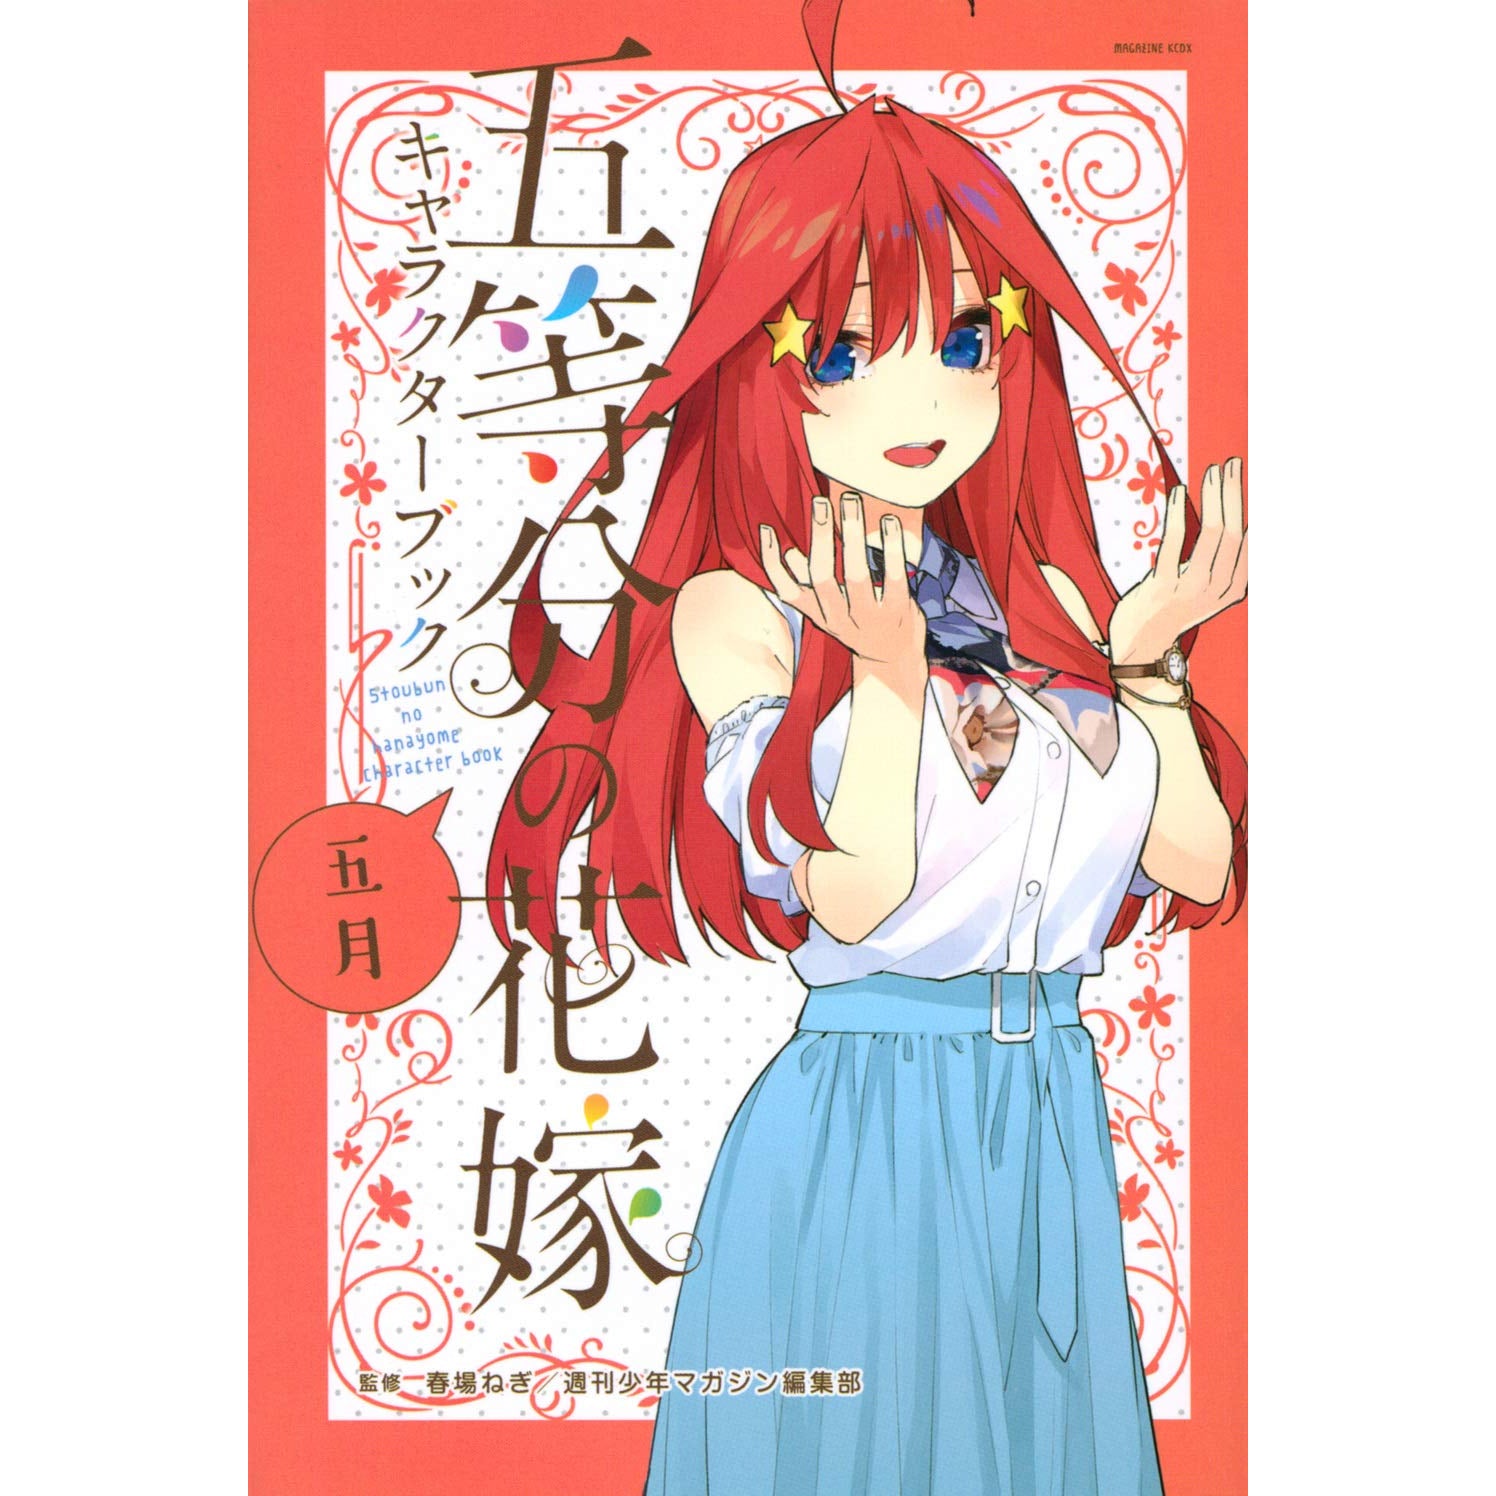 The Quintessential Quintuplets Characters Art Board Print for